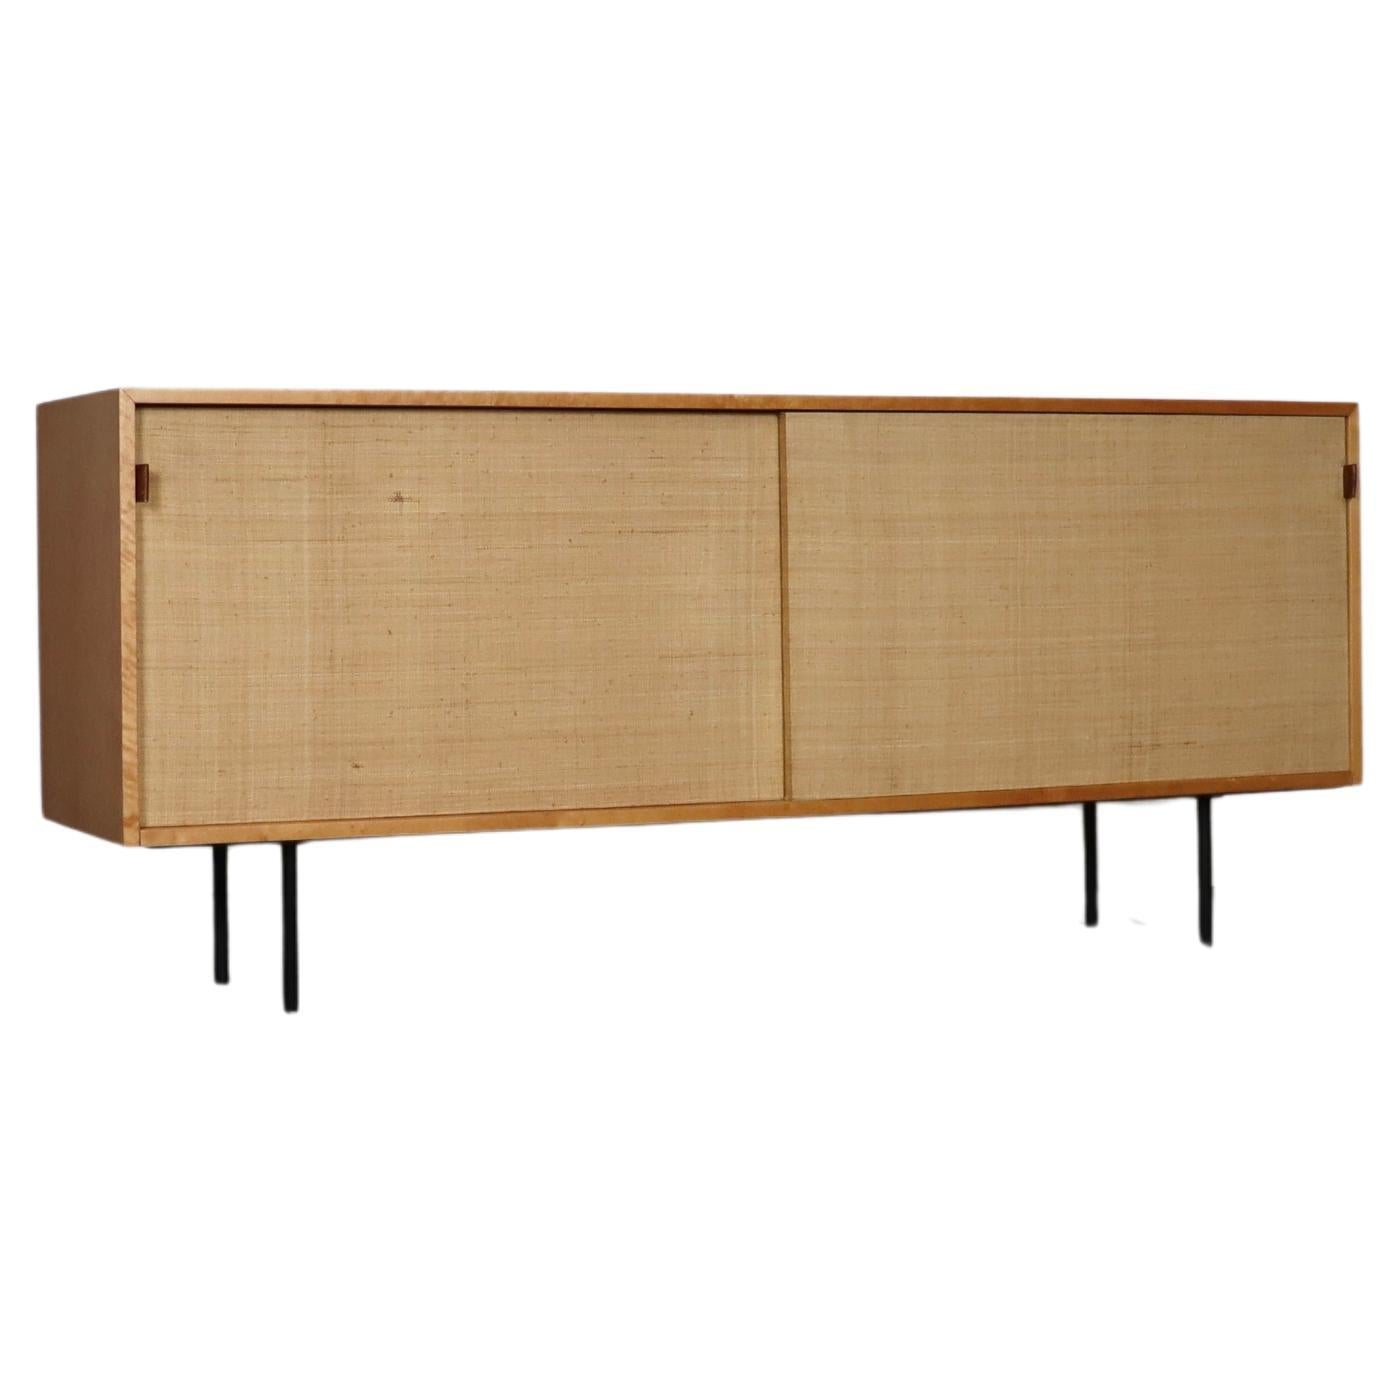 Florence Knoll Model 116 Seagrass Sideboard, 1950s For Sale